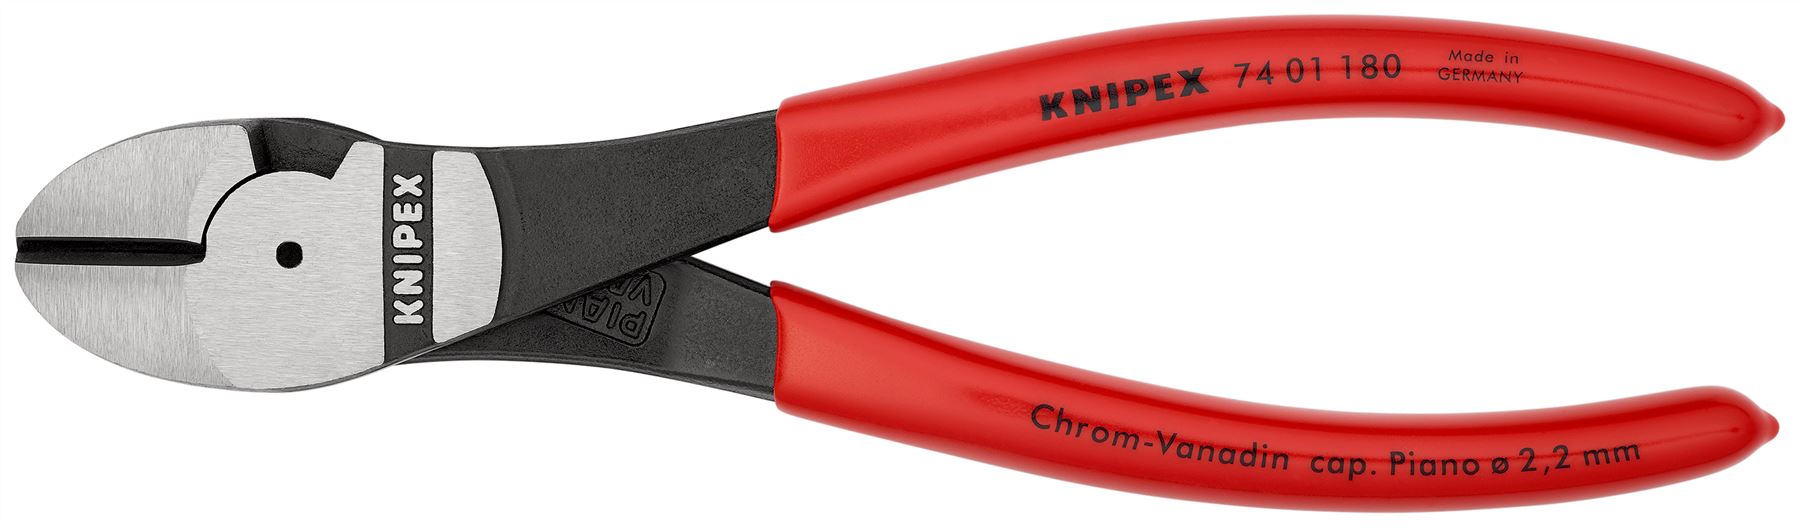 Knipex High Leverage Diagonal Side Cutting Pliers 180mm 74 01 180